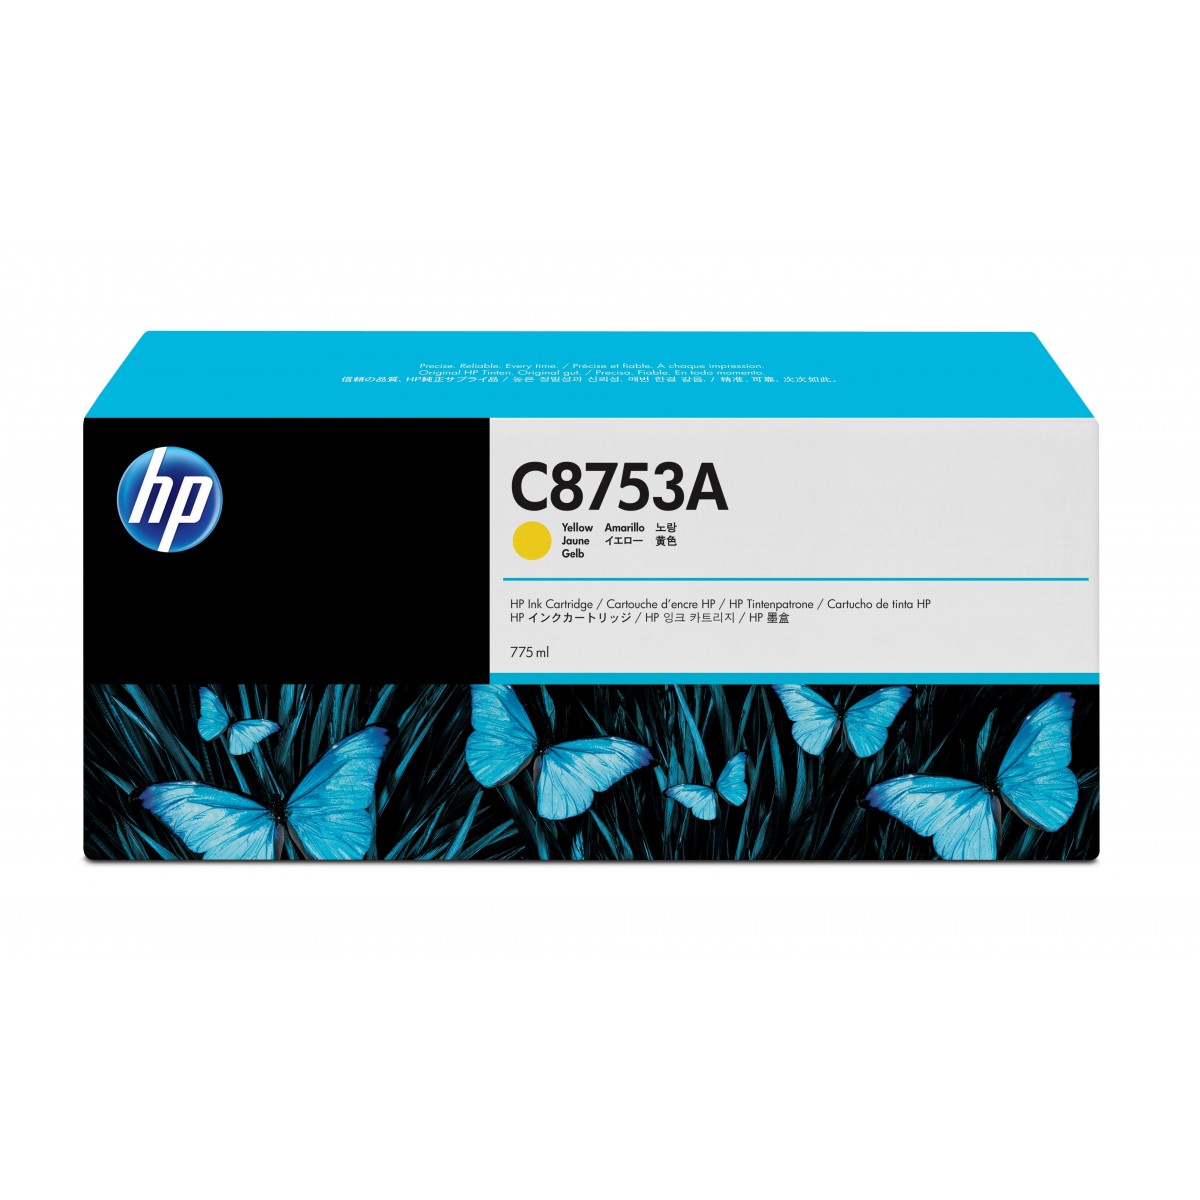 HP C8753A - Original - Pigment-based ink - Yellow - HP CM 8060 - 8050 Color MFP - 1 pc(s) - Yellow